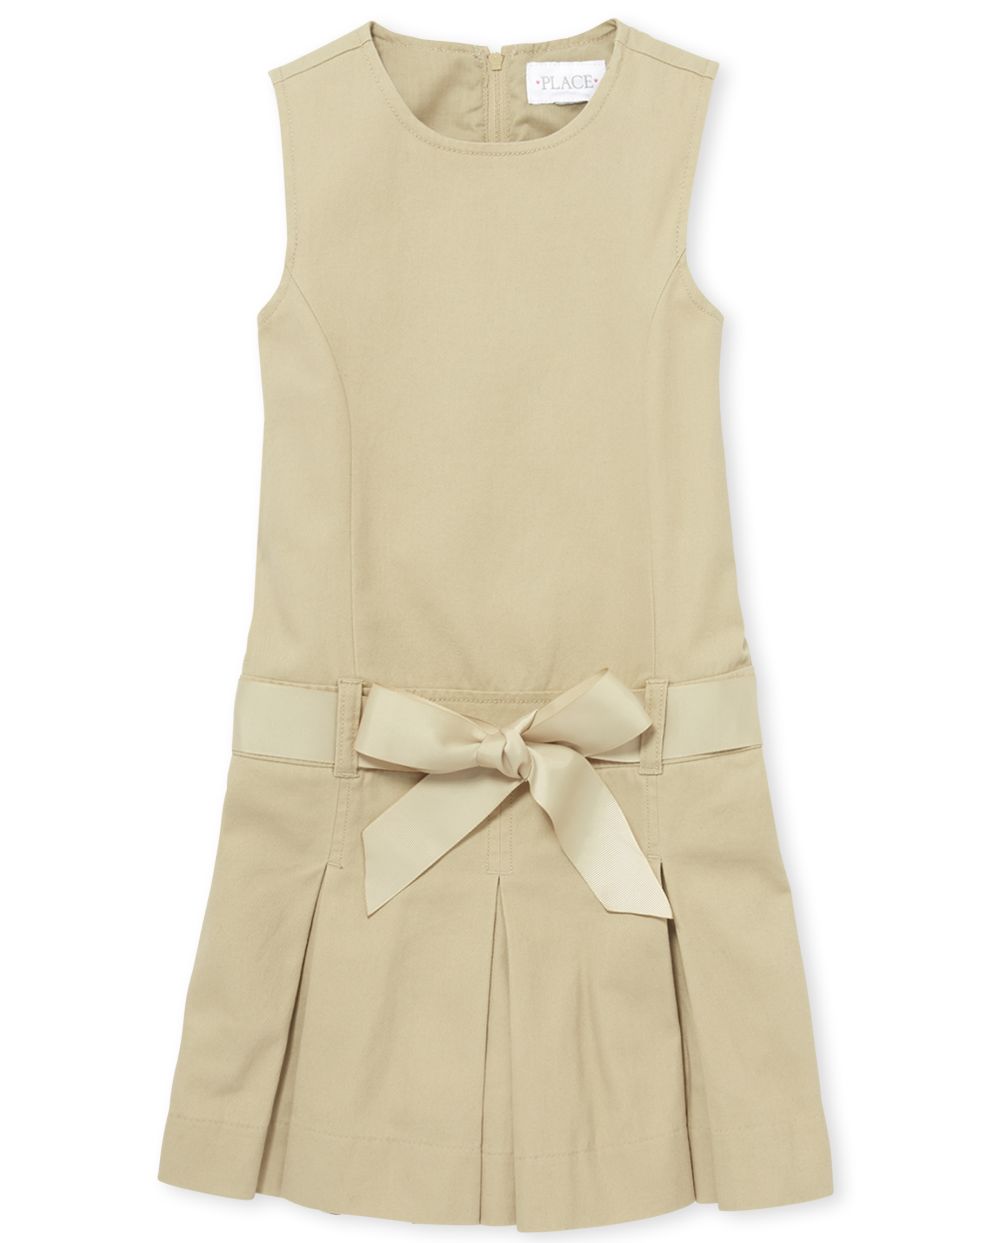 Girls Round Neck Belted Self Tie Pleated Back Zipper Above the Knee Sleeveless Jumper With a Ribbon